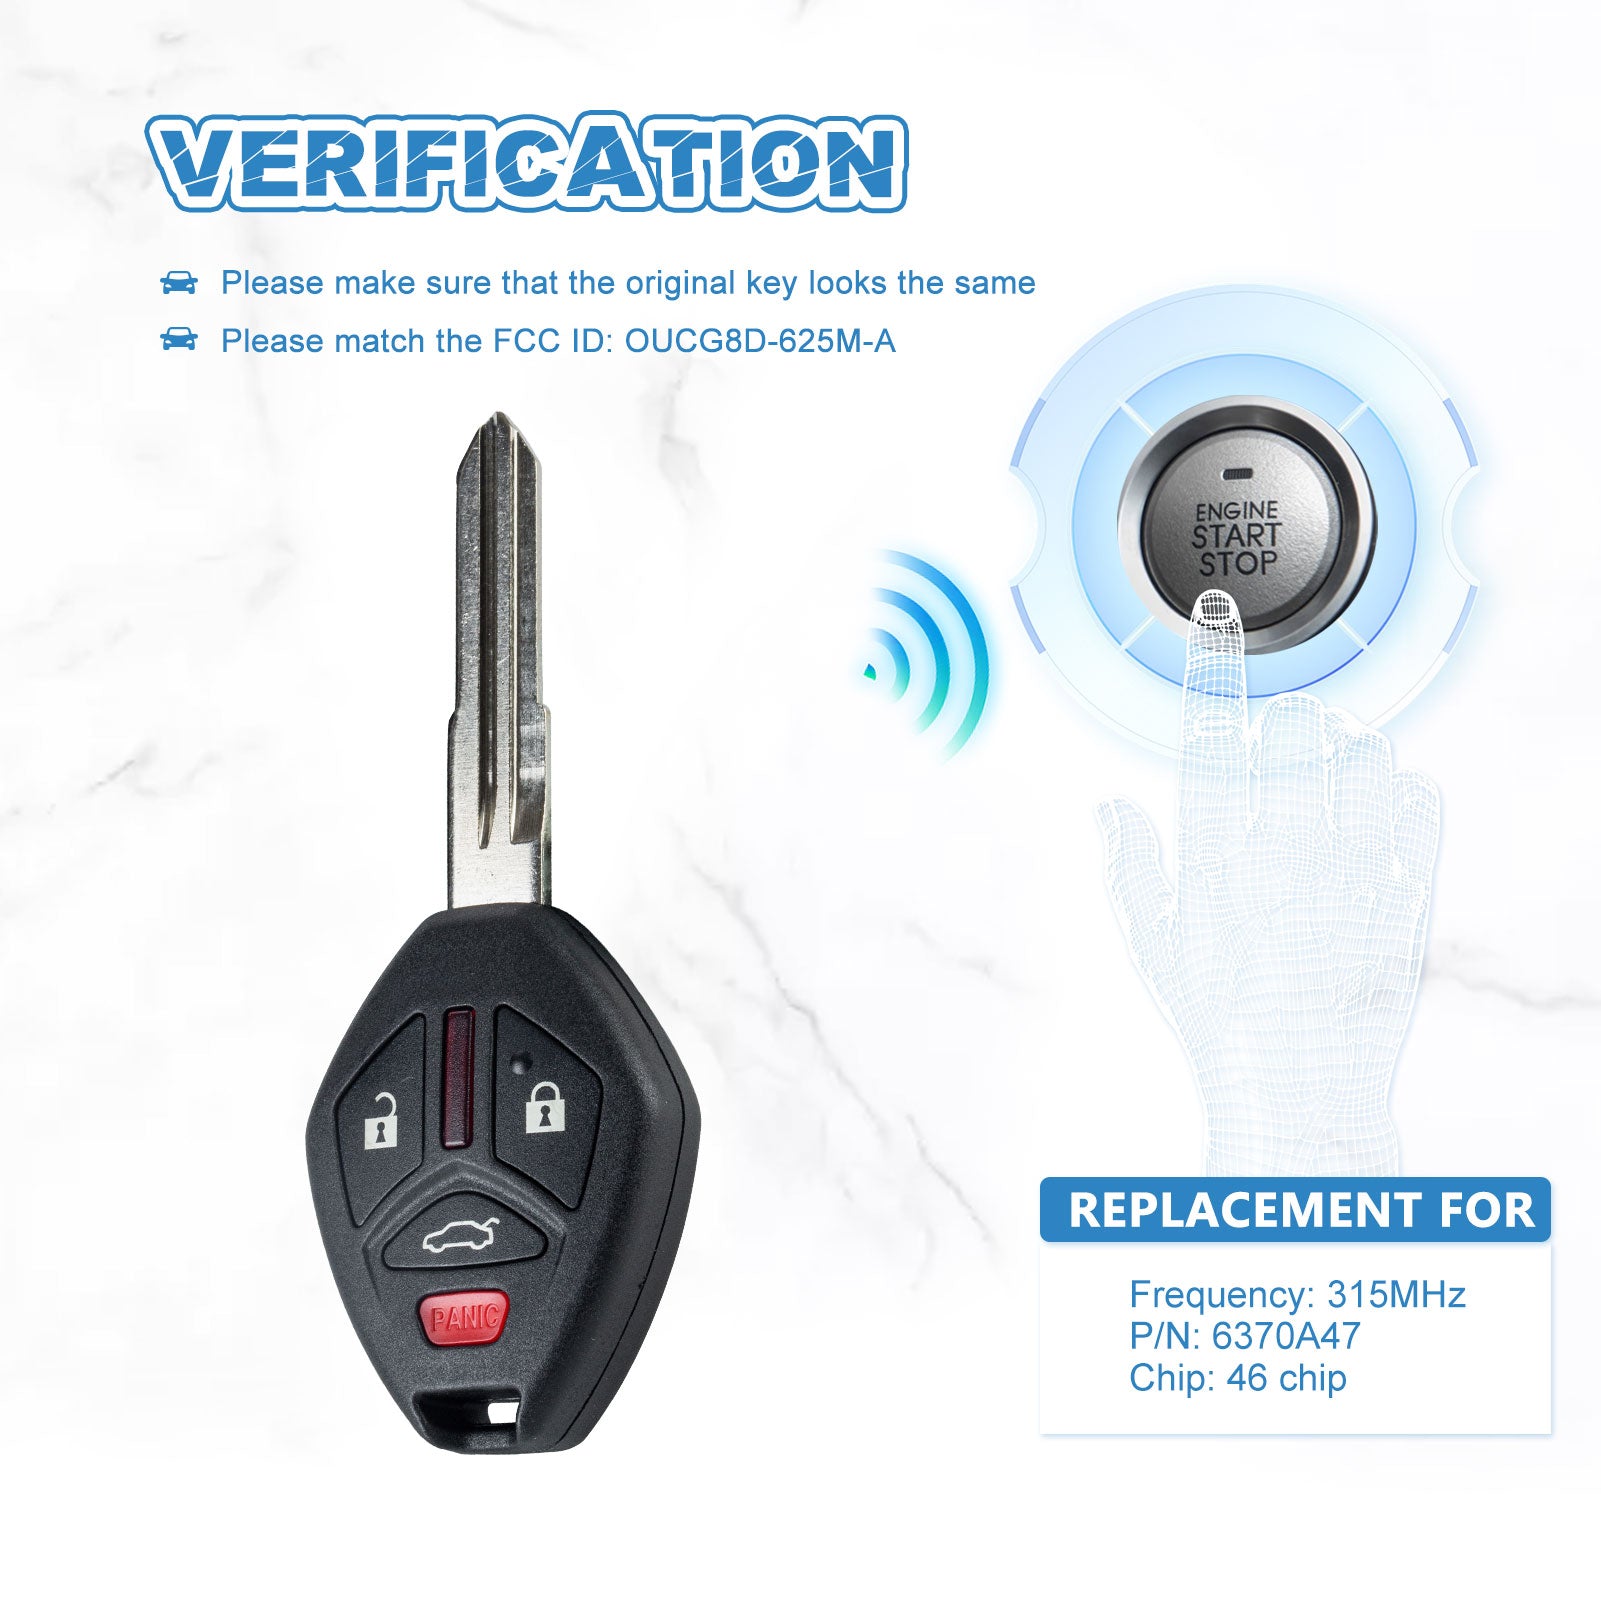 315MHz Car Key Fob Keyless Entry Control Replacement for 2007-2018 Mitsubishi Lancer OUCG8D-625M-A  KR-M4SD